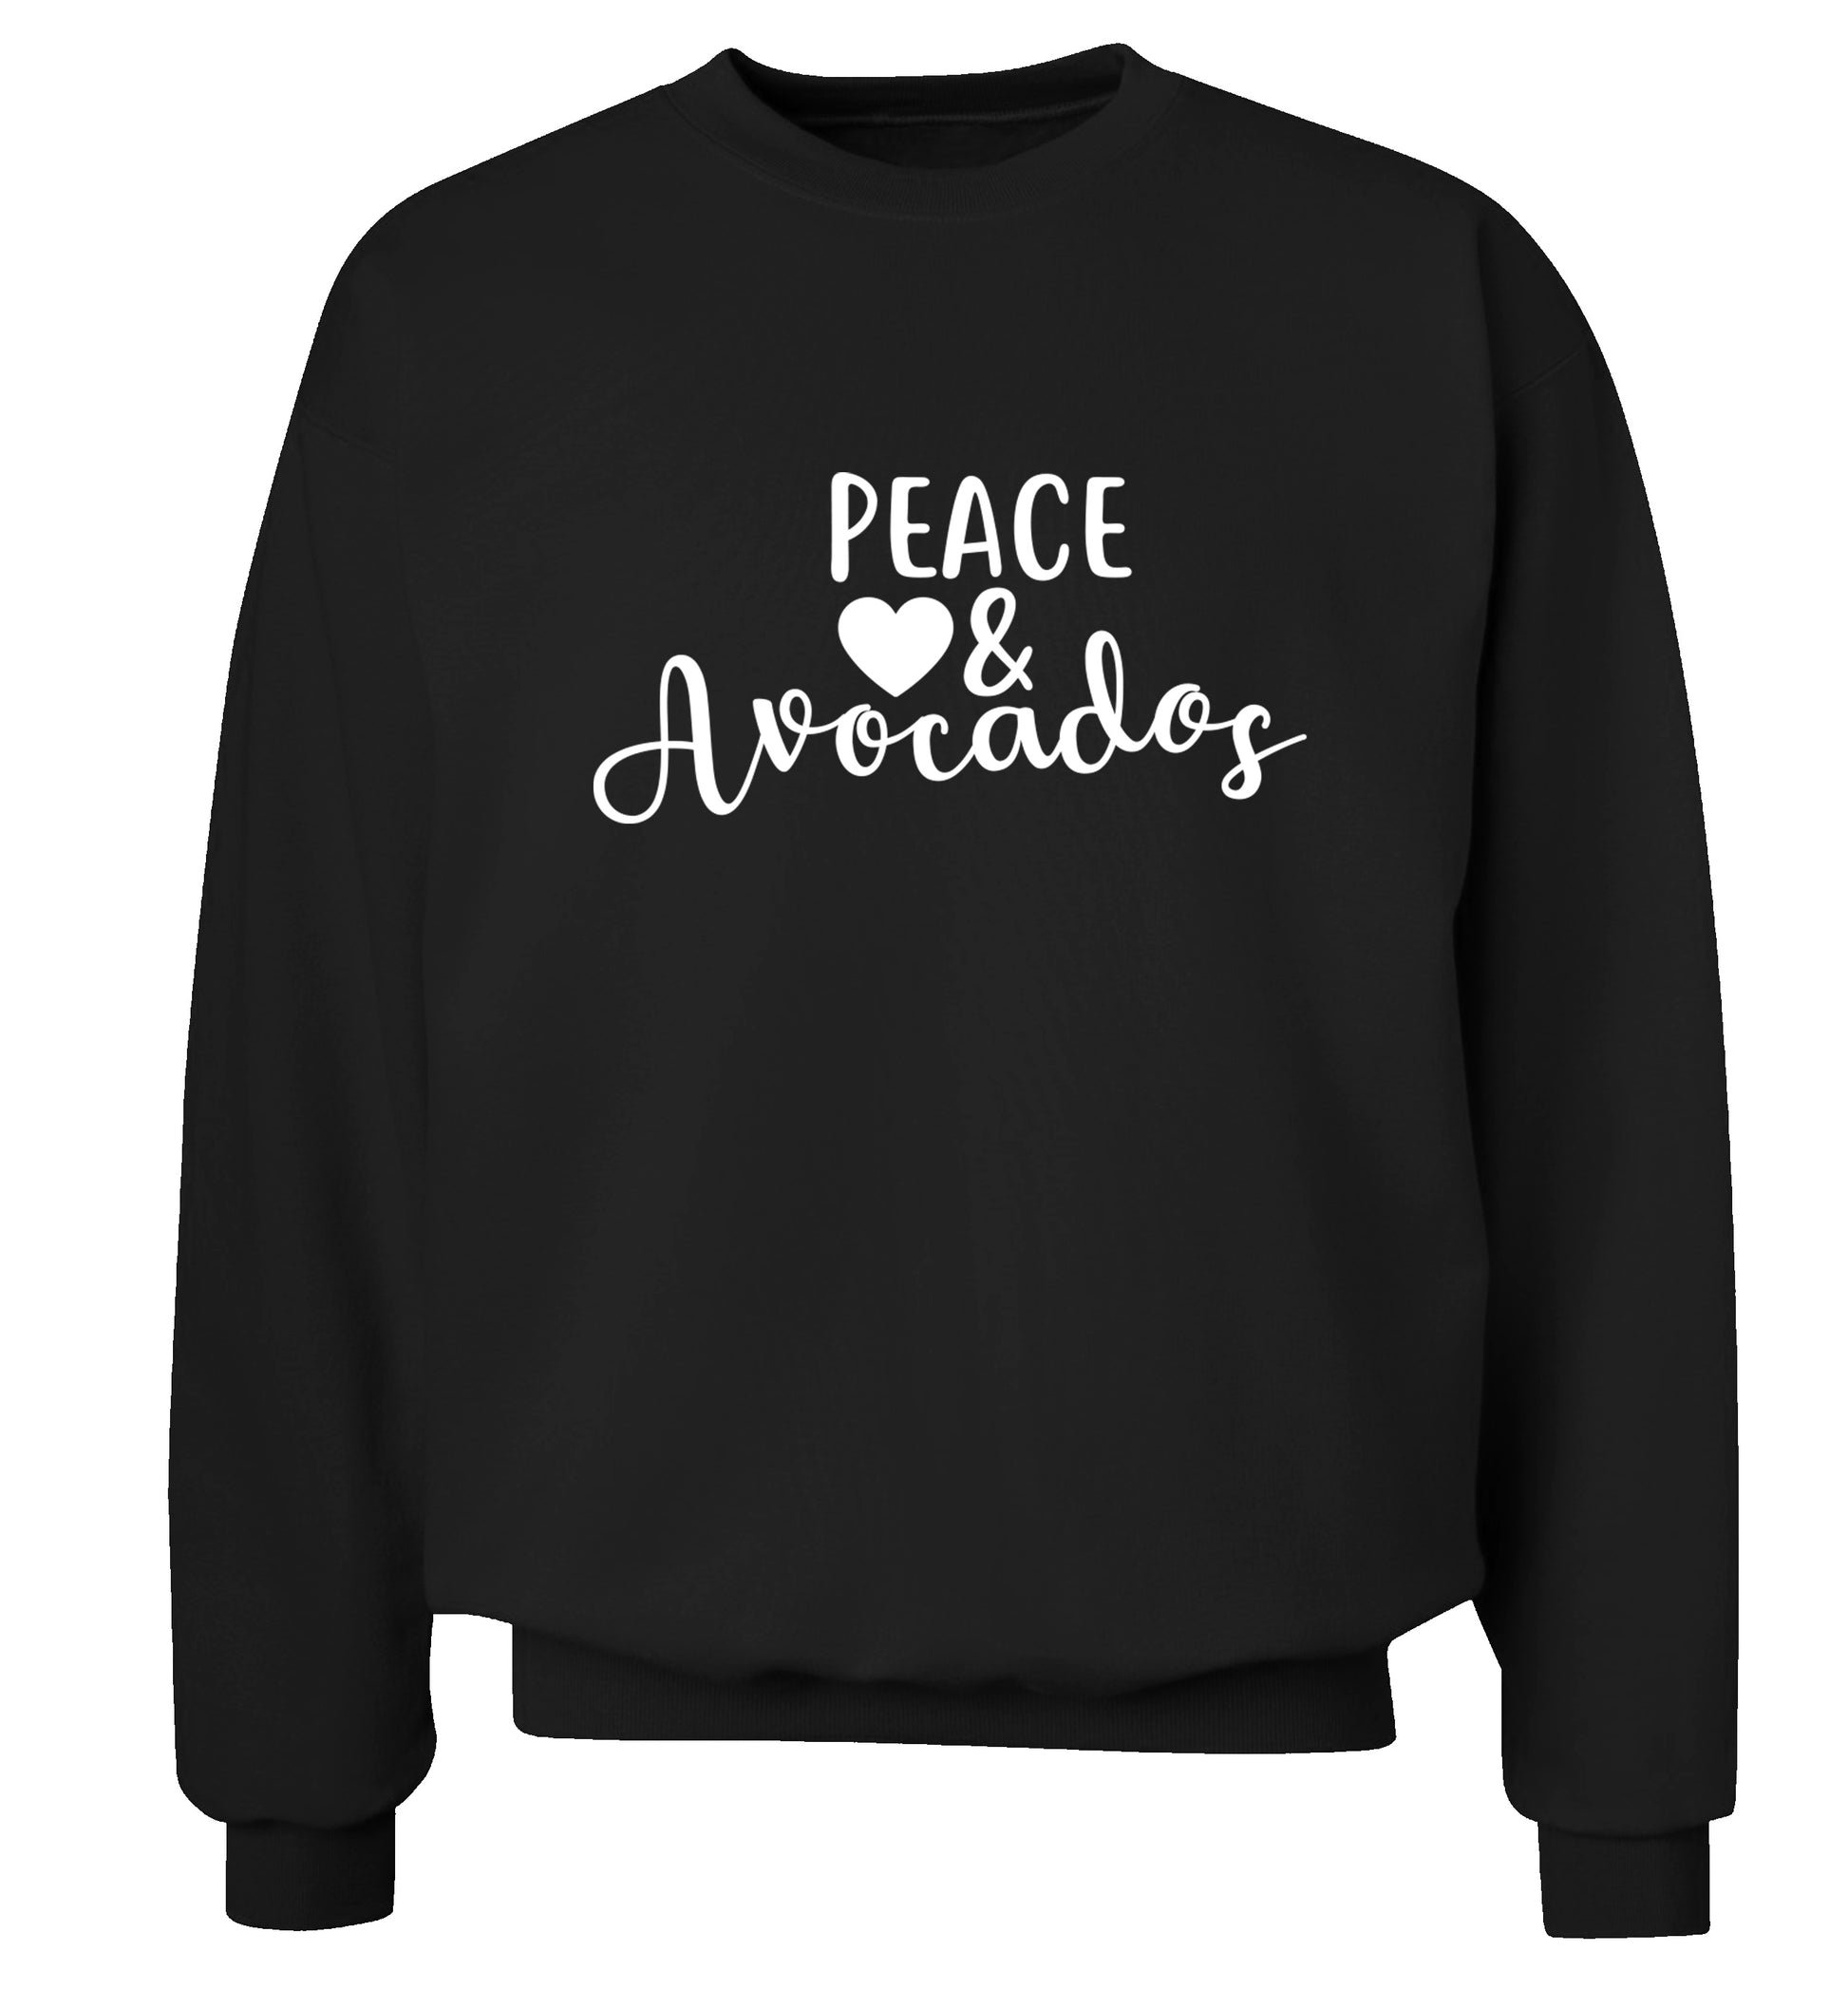 Peace love and avocados Adult's unisex black Sweater 2XL